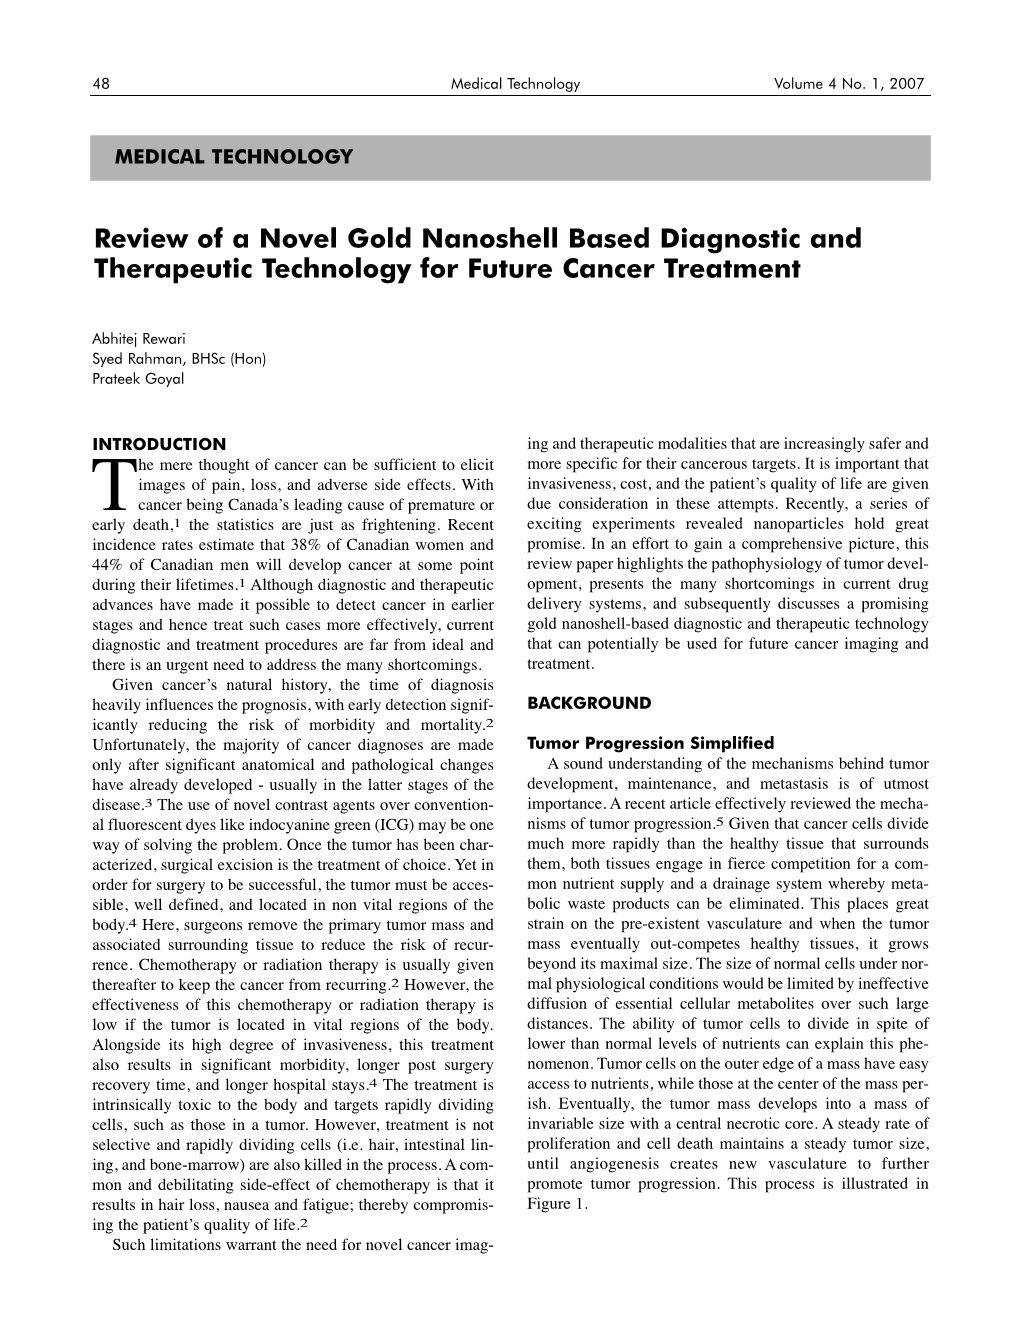 Review of a Novel Gold Nanoshell Based Diagnostic and Therapeutic Technology for Future Cancer Treatment